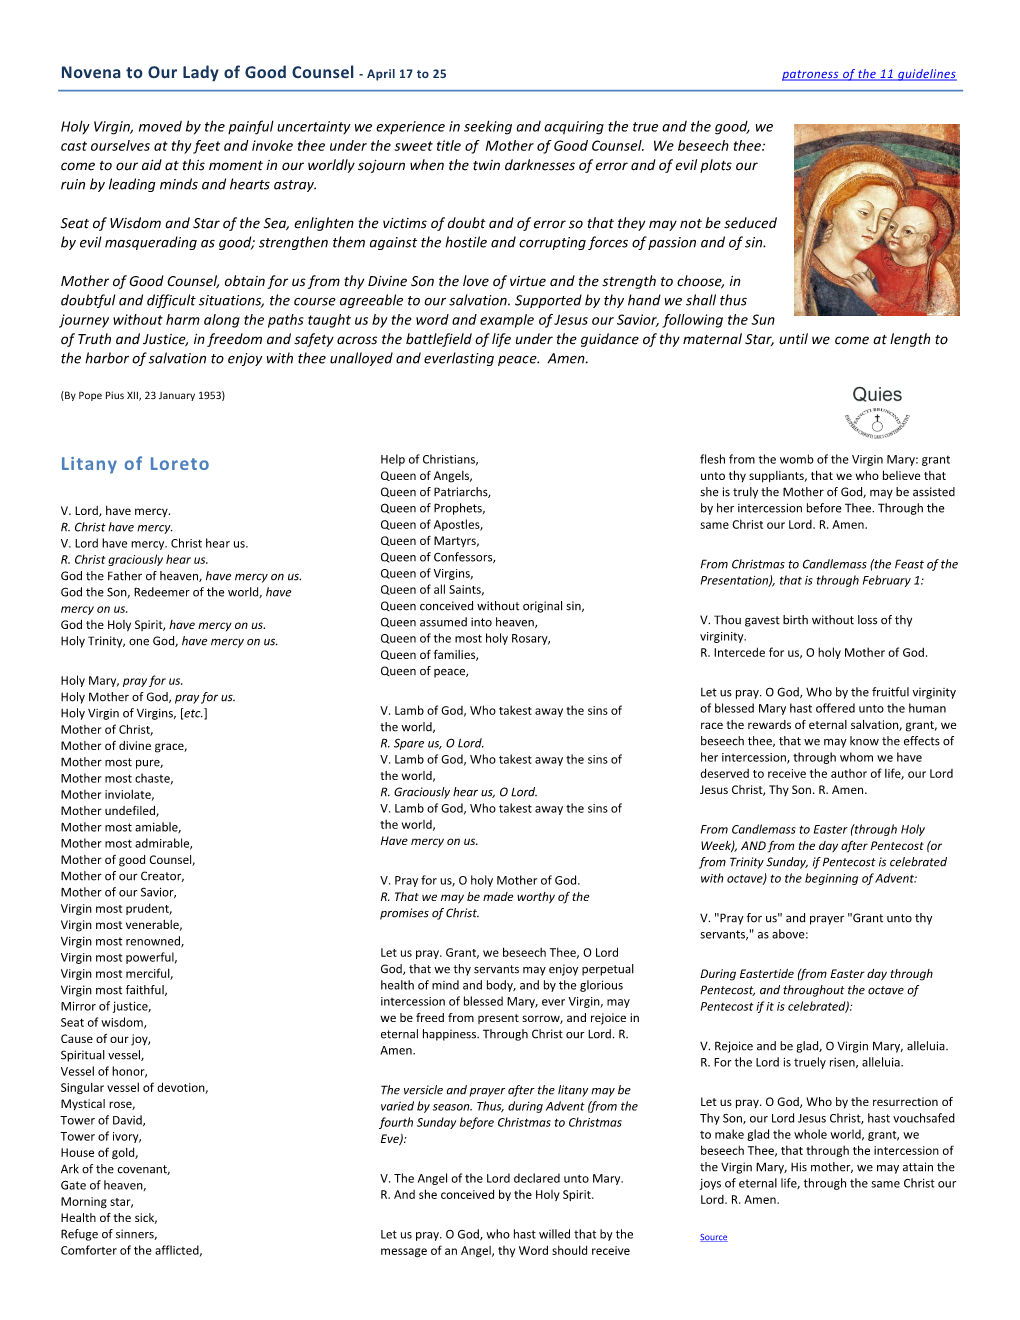 Novena to Our Lady of Good Counsel and the Litany of Loreto